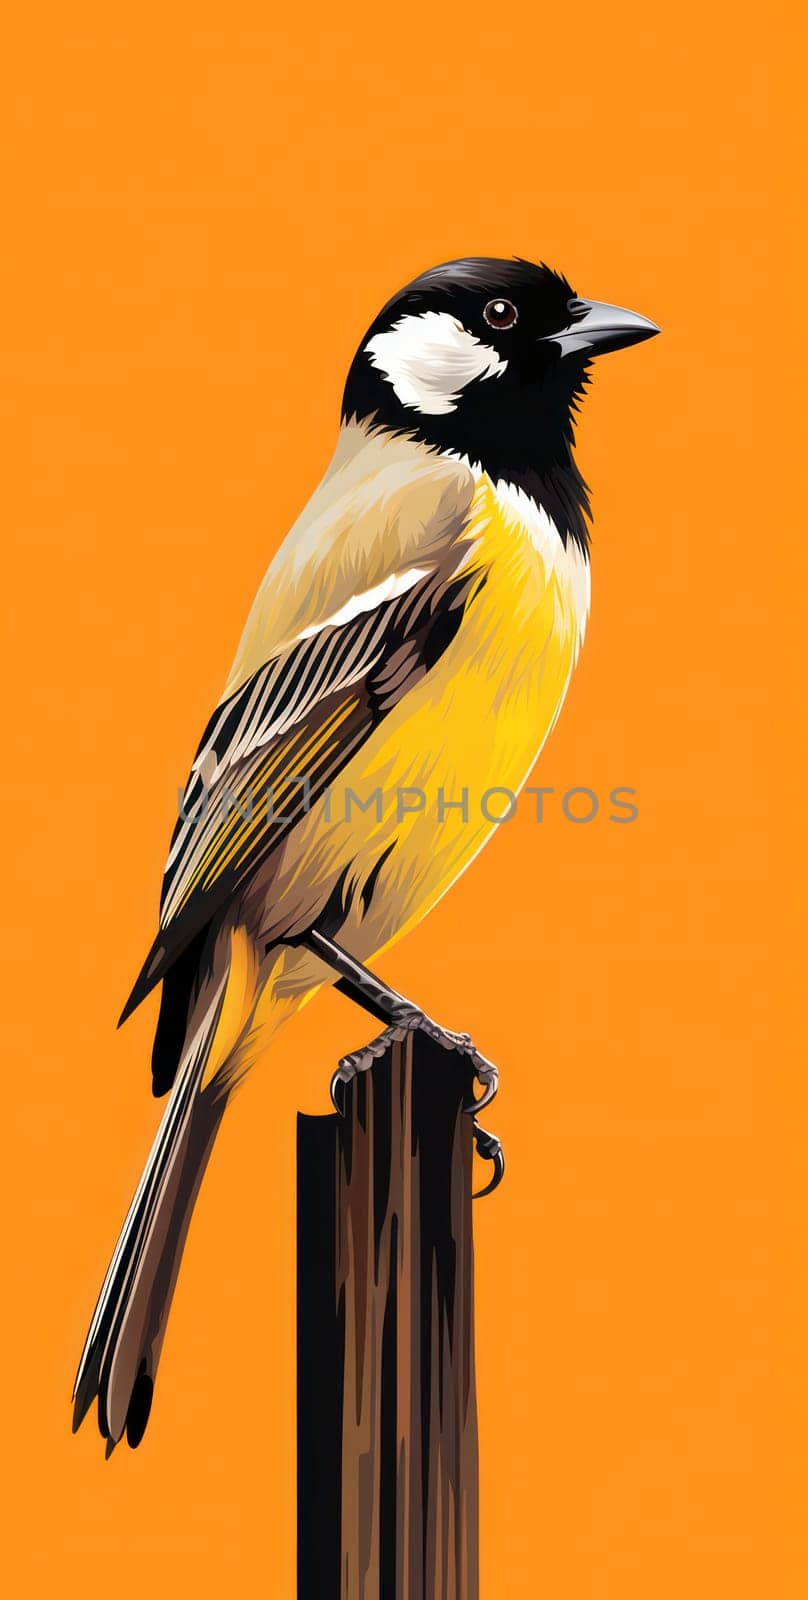 Colorful Winged Beauty: A Majestic Yellow and Black Titmouse Perched on a Winter Branch